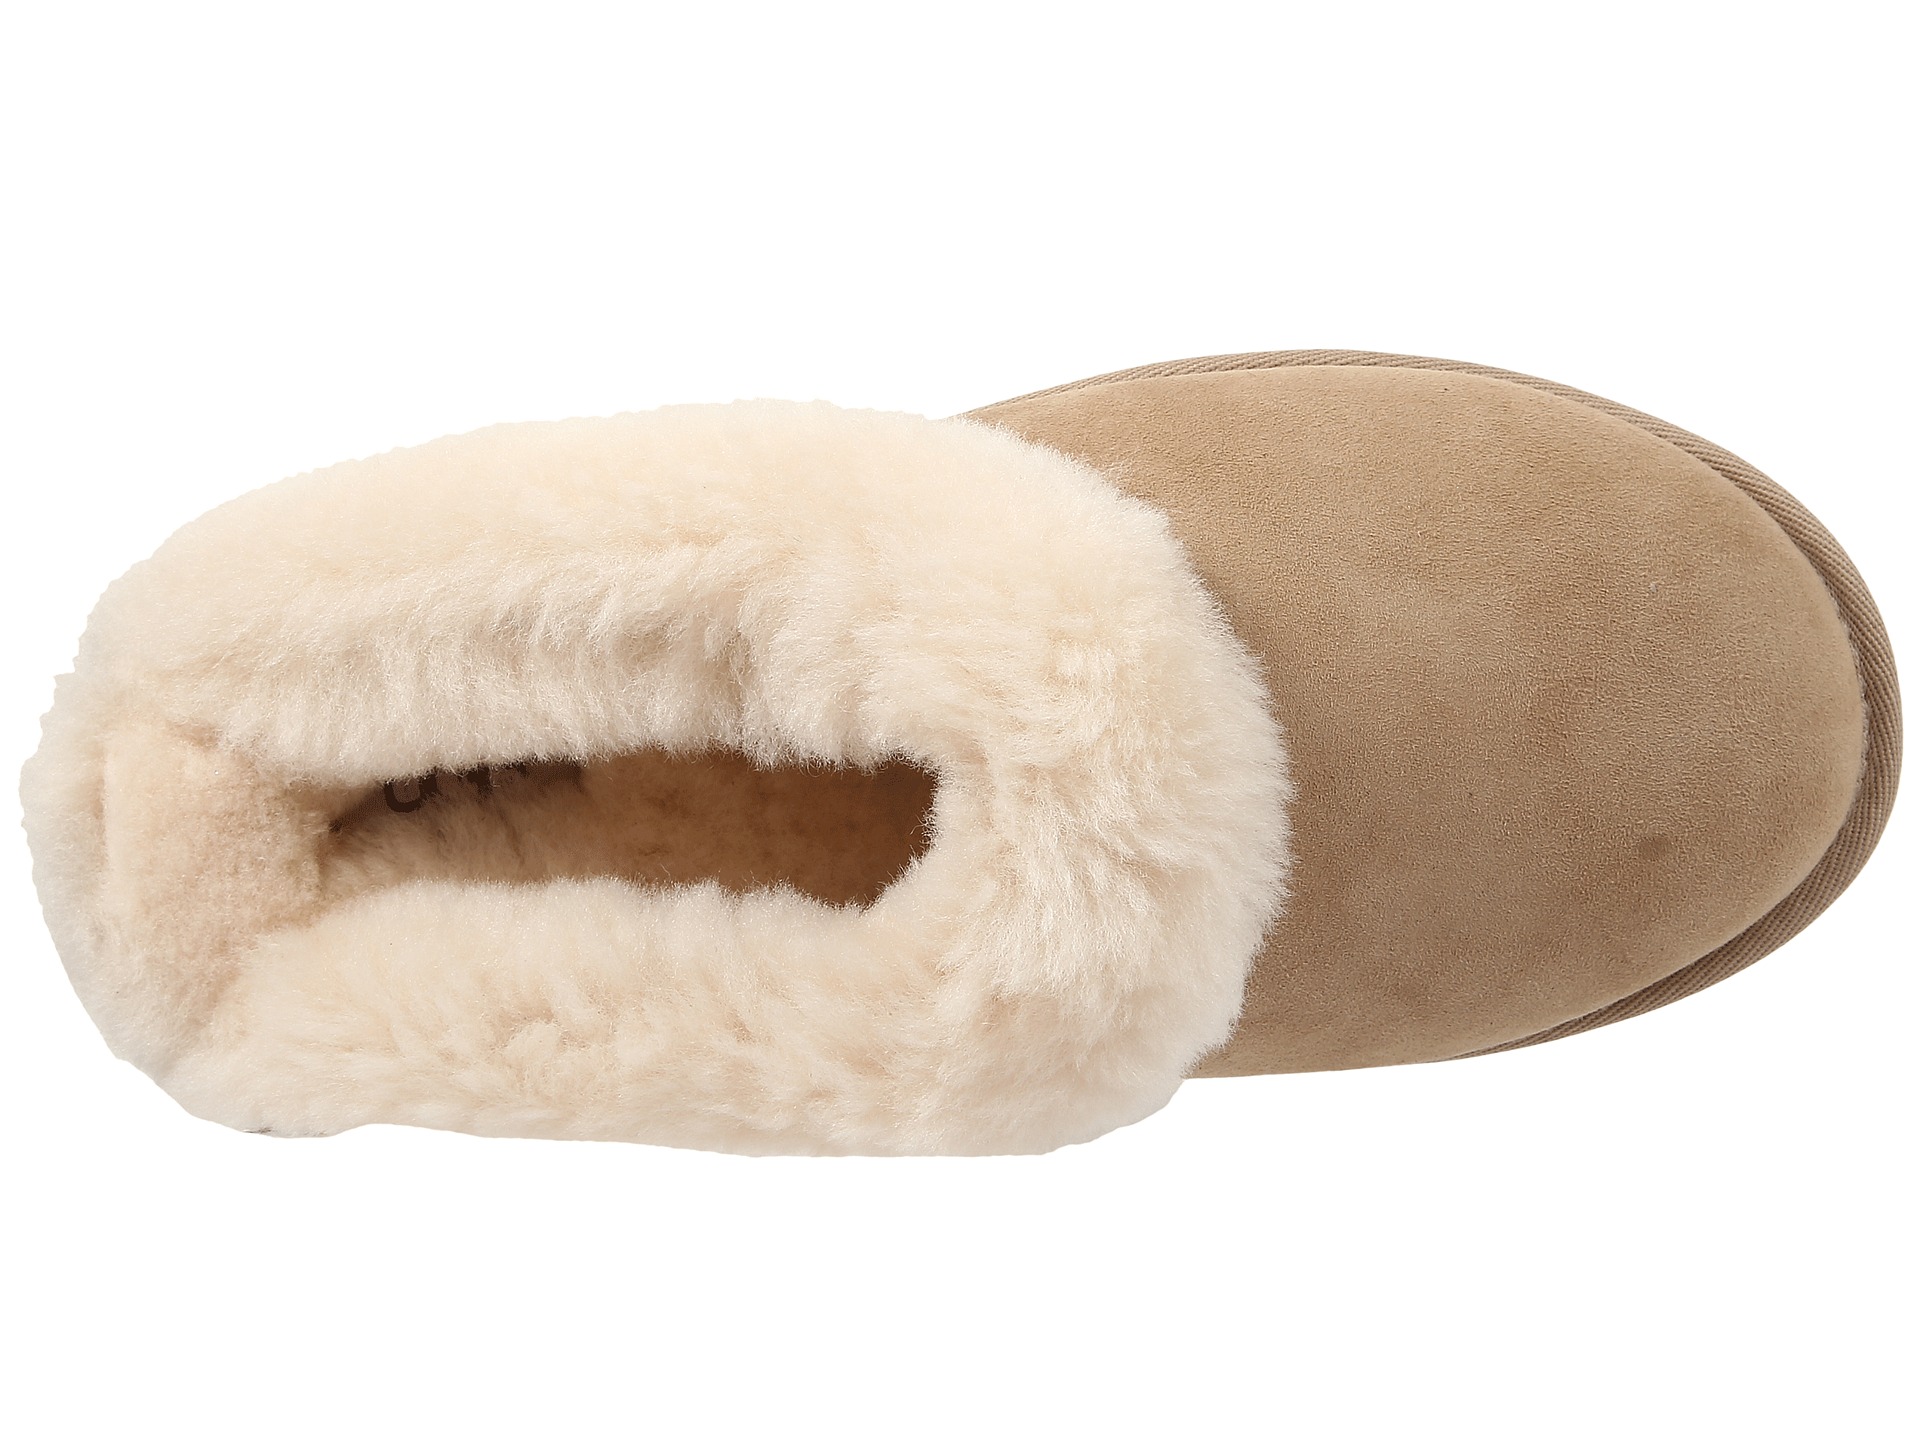 UGG Cluggette Chestnut Twinface - Zappos.com Free Shipping BOTH Ways